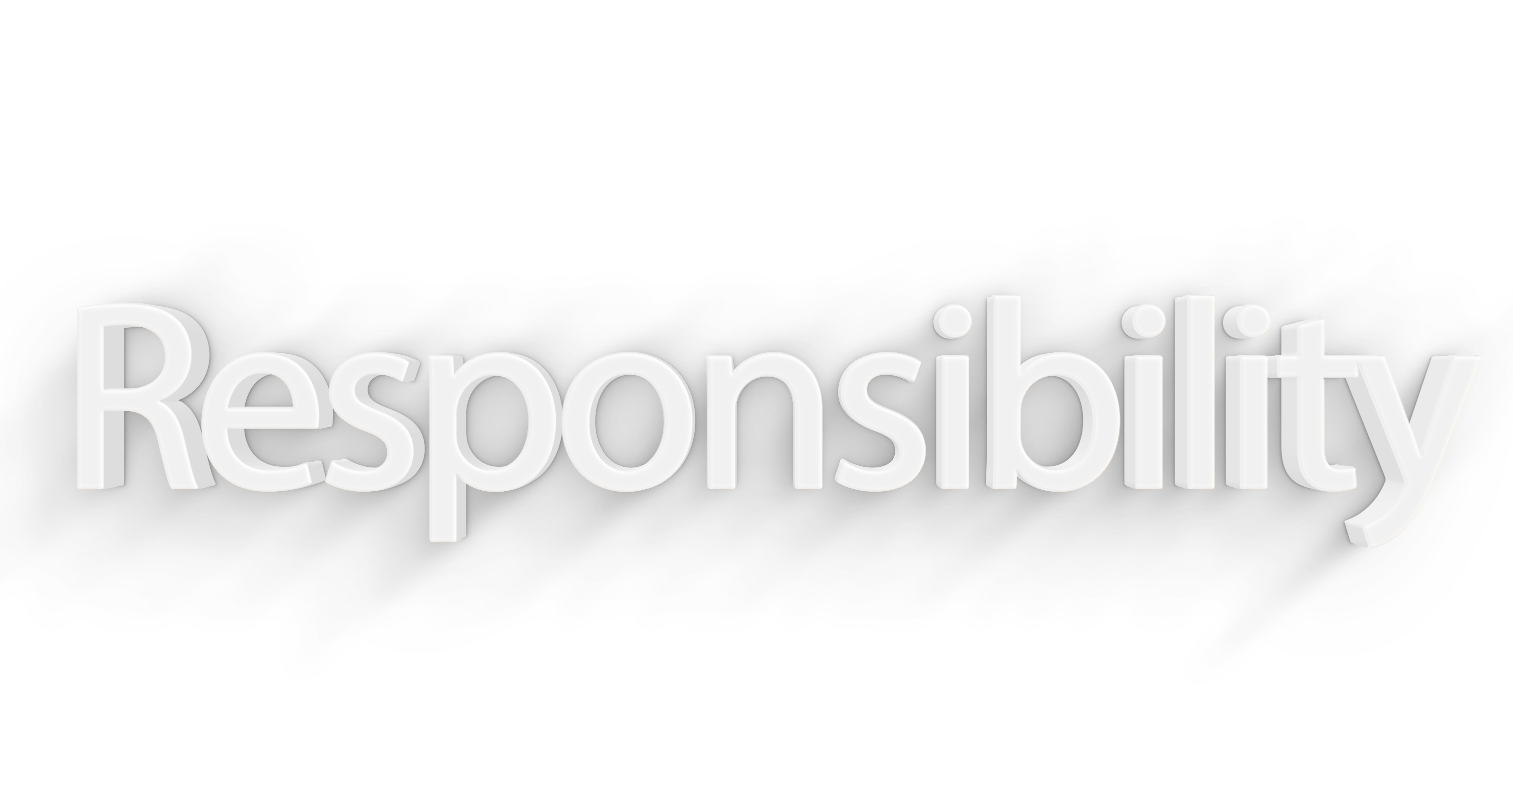 Responsibility png, word Responsibility png, Responsibility word png, Responsibility text png, Responsibility font png, word Responsibility text effects typography PNG transparent images